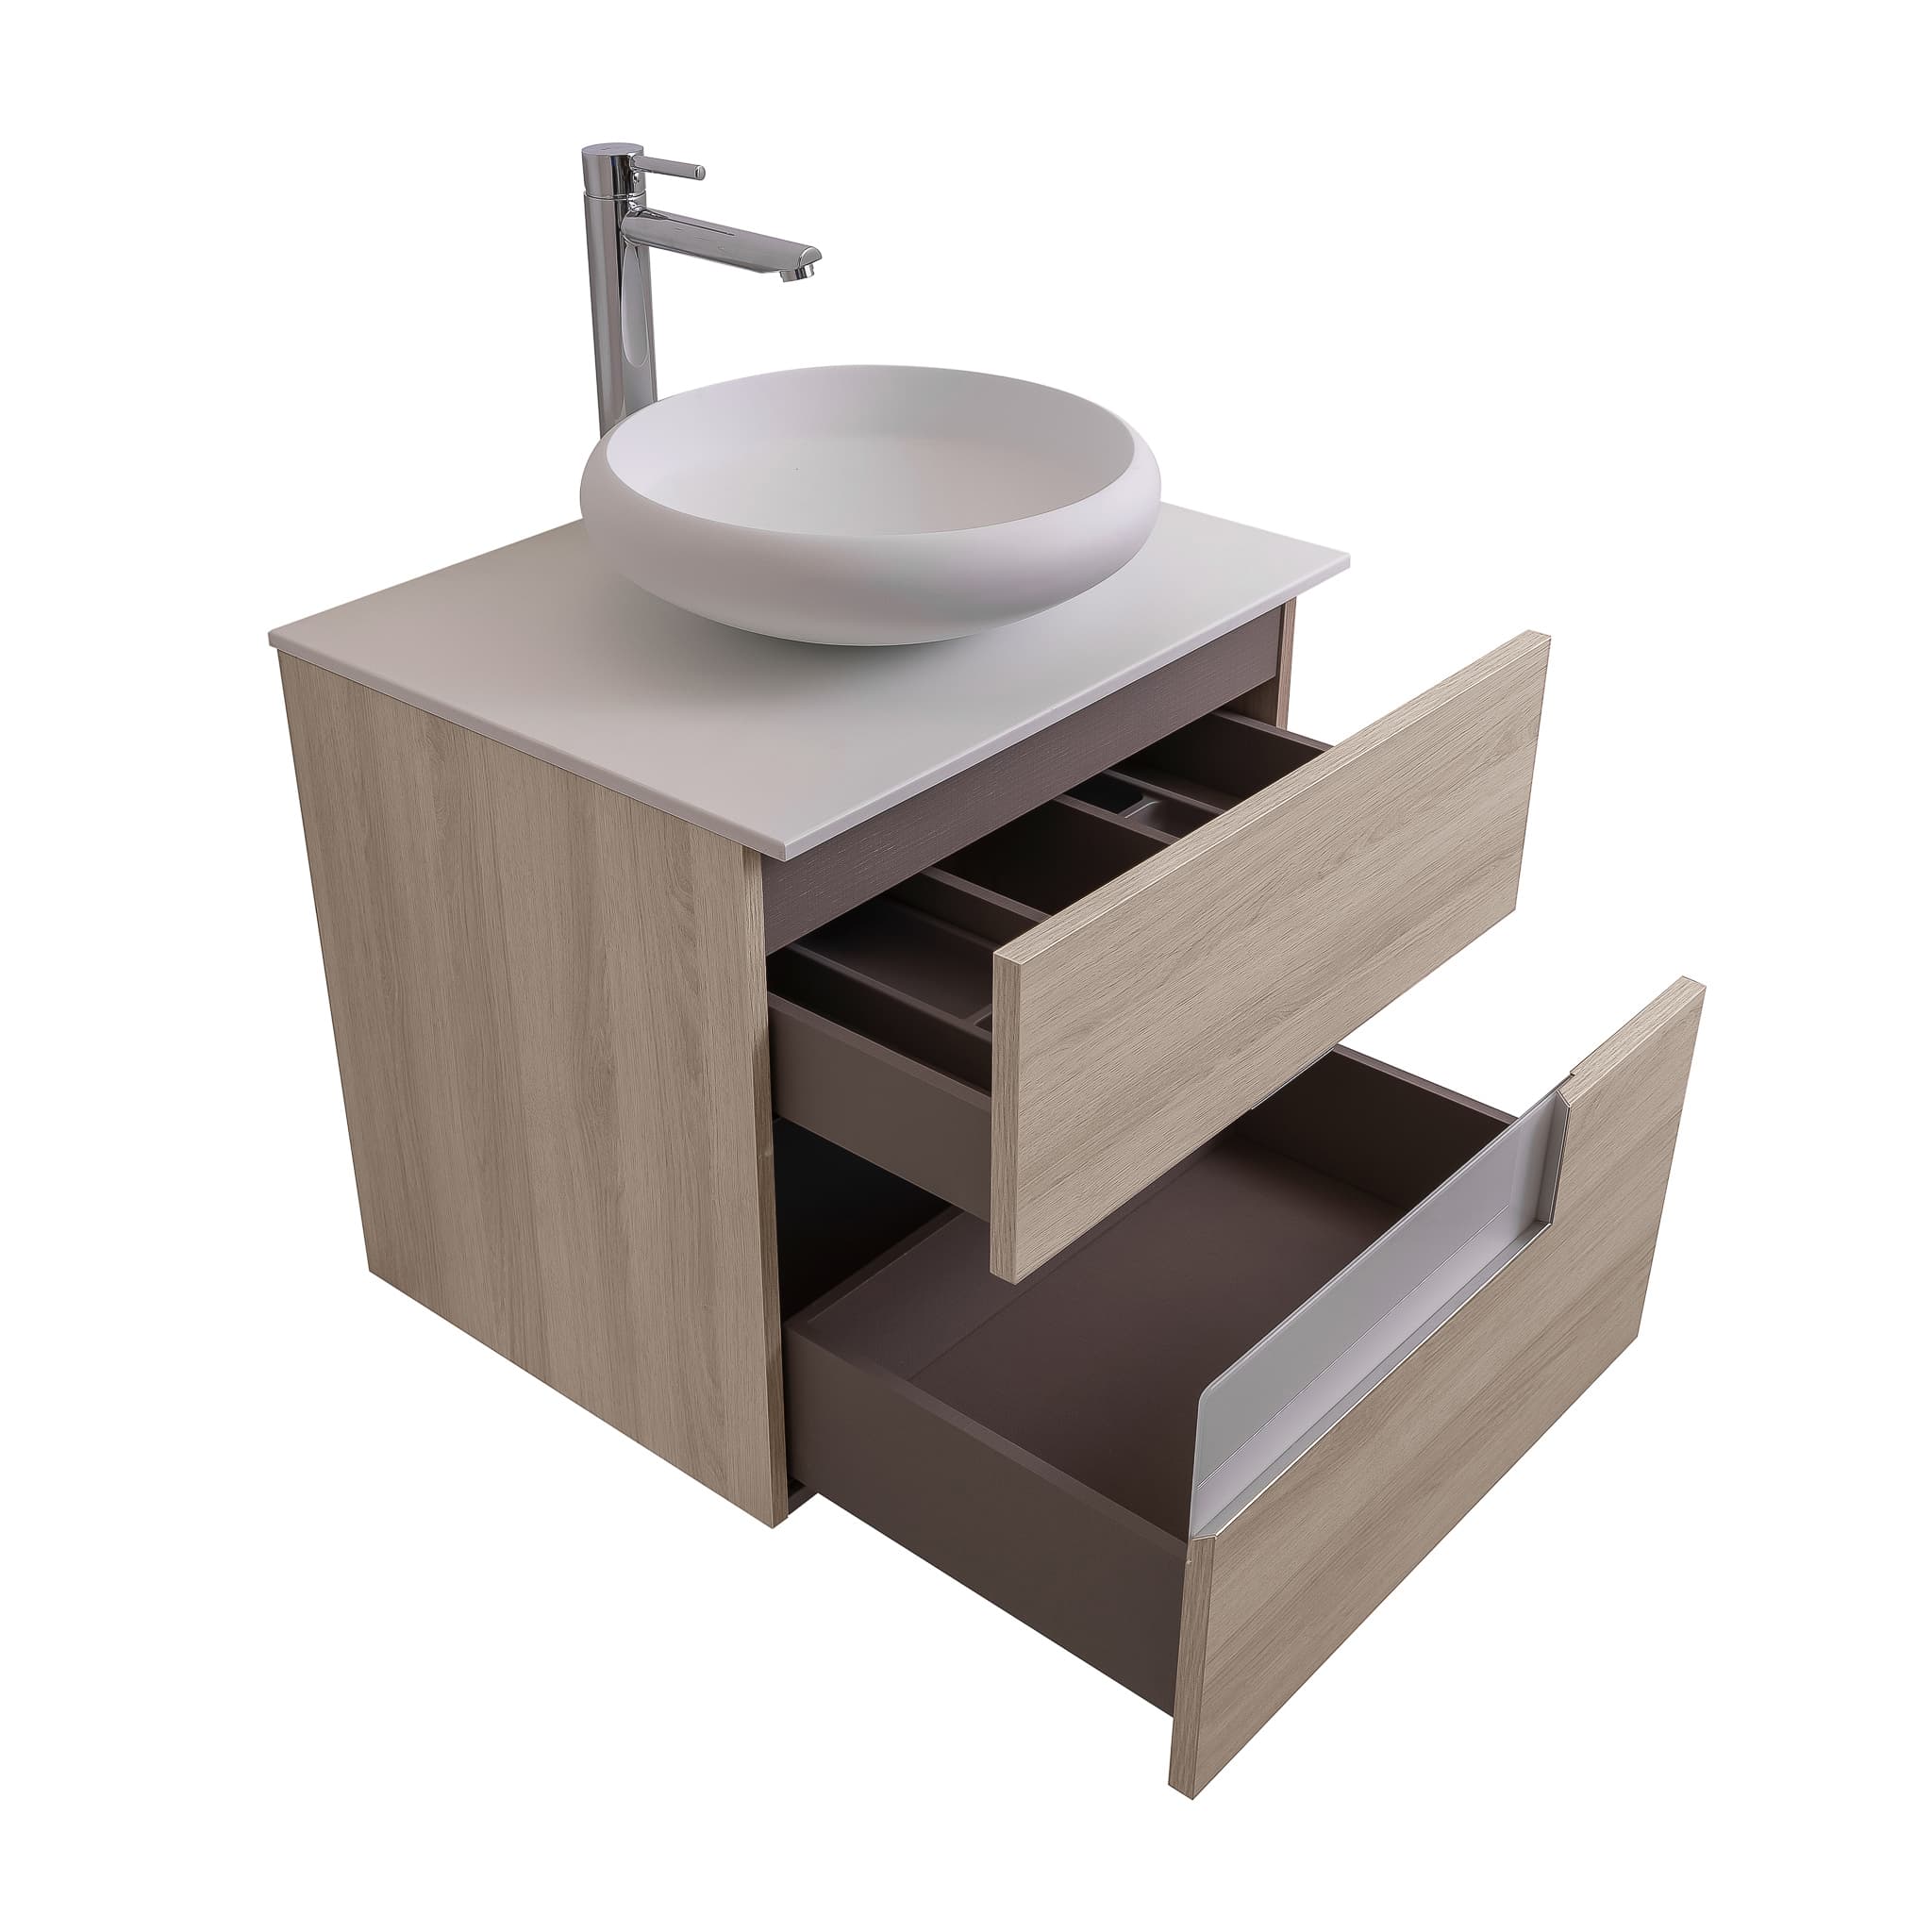 Vision 23.5 Natural Light Wood Cabinet, Solid Surface Flat White Counter And Round Solid Surface White Basin 1153, Wall Mounted Modern Vanity Set